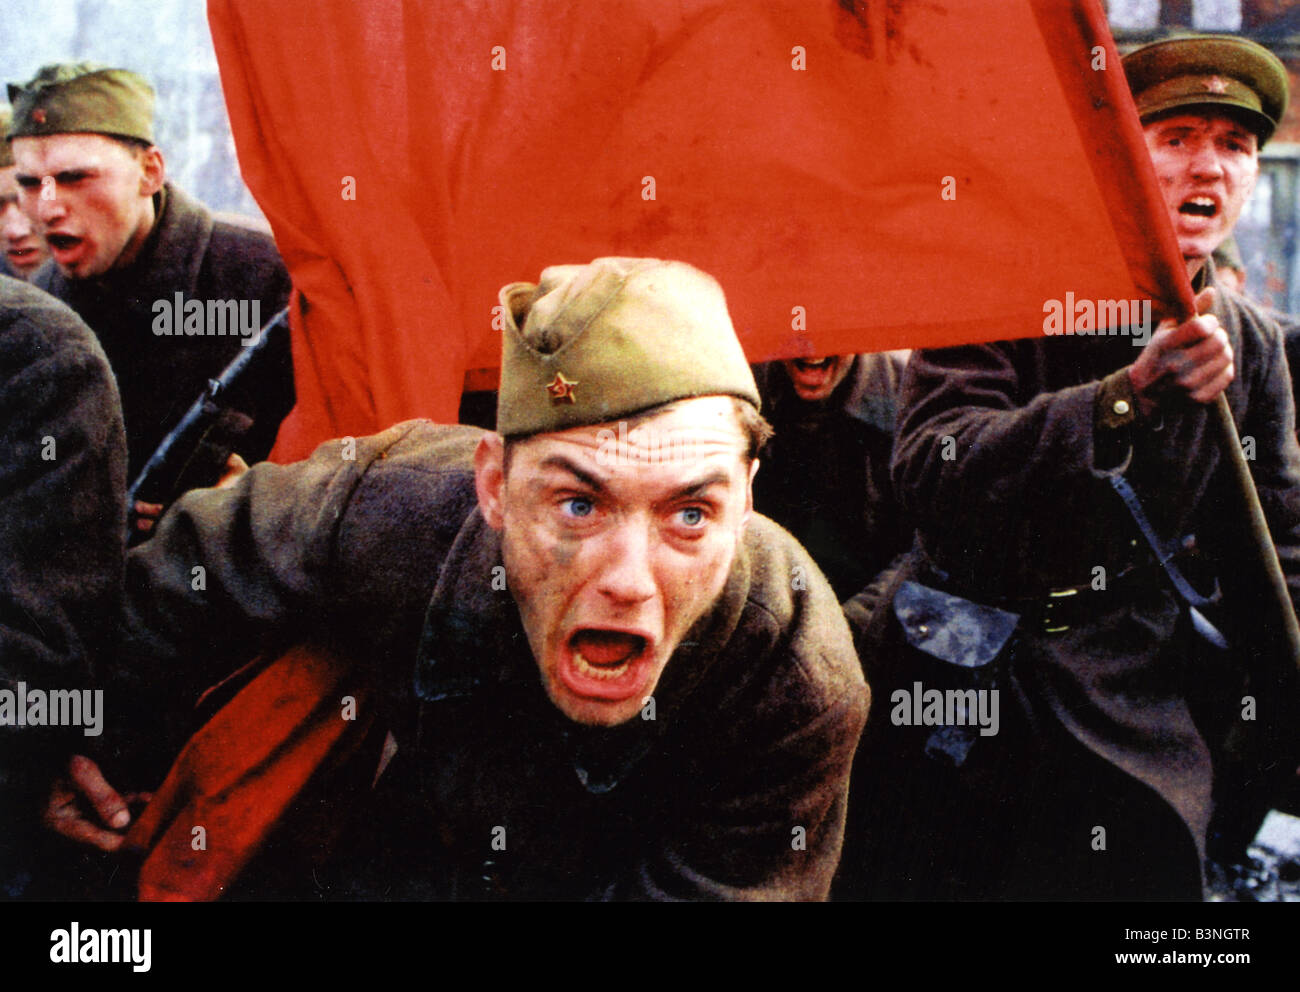 ENEMY AT THE GATES  2001 Pathe/Mandalay film with Jude Law about the Battle of Stalingrad Stock Photo